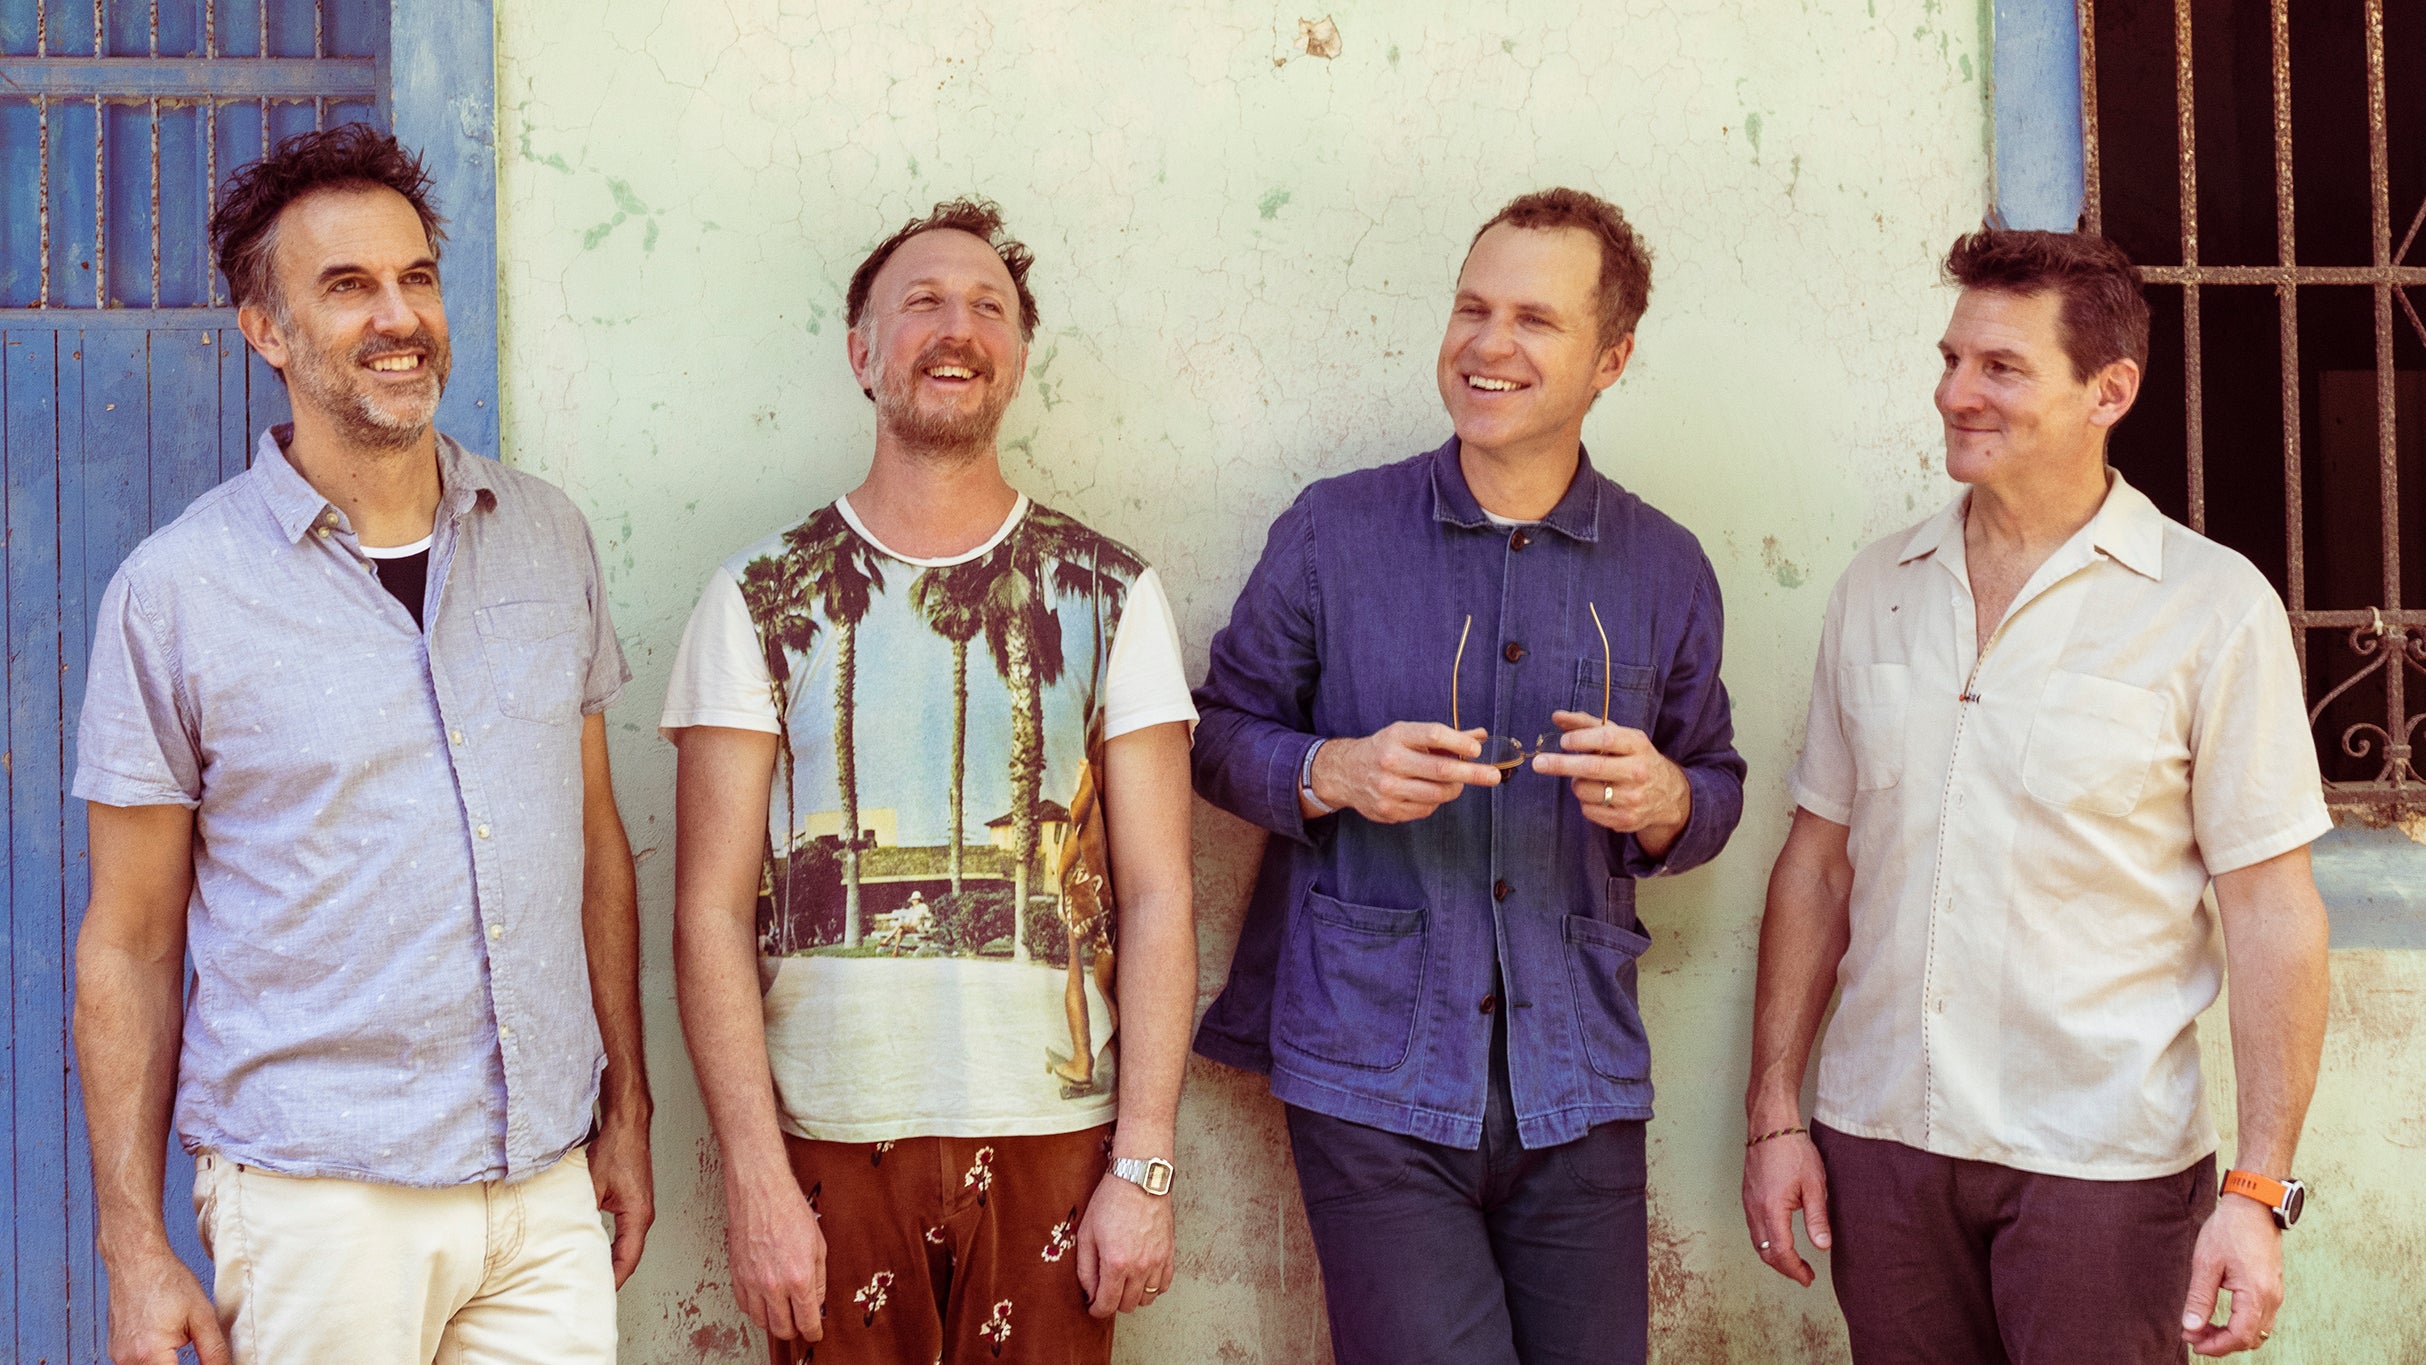 An Evening With Guster free presale code for concert tickets in St Louis, MO (The Pageant)